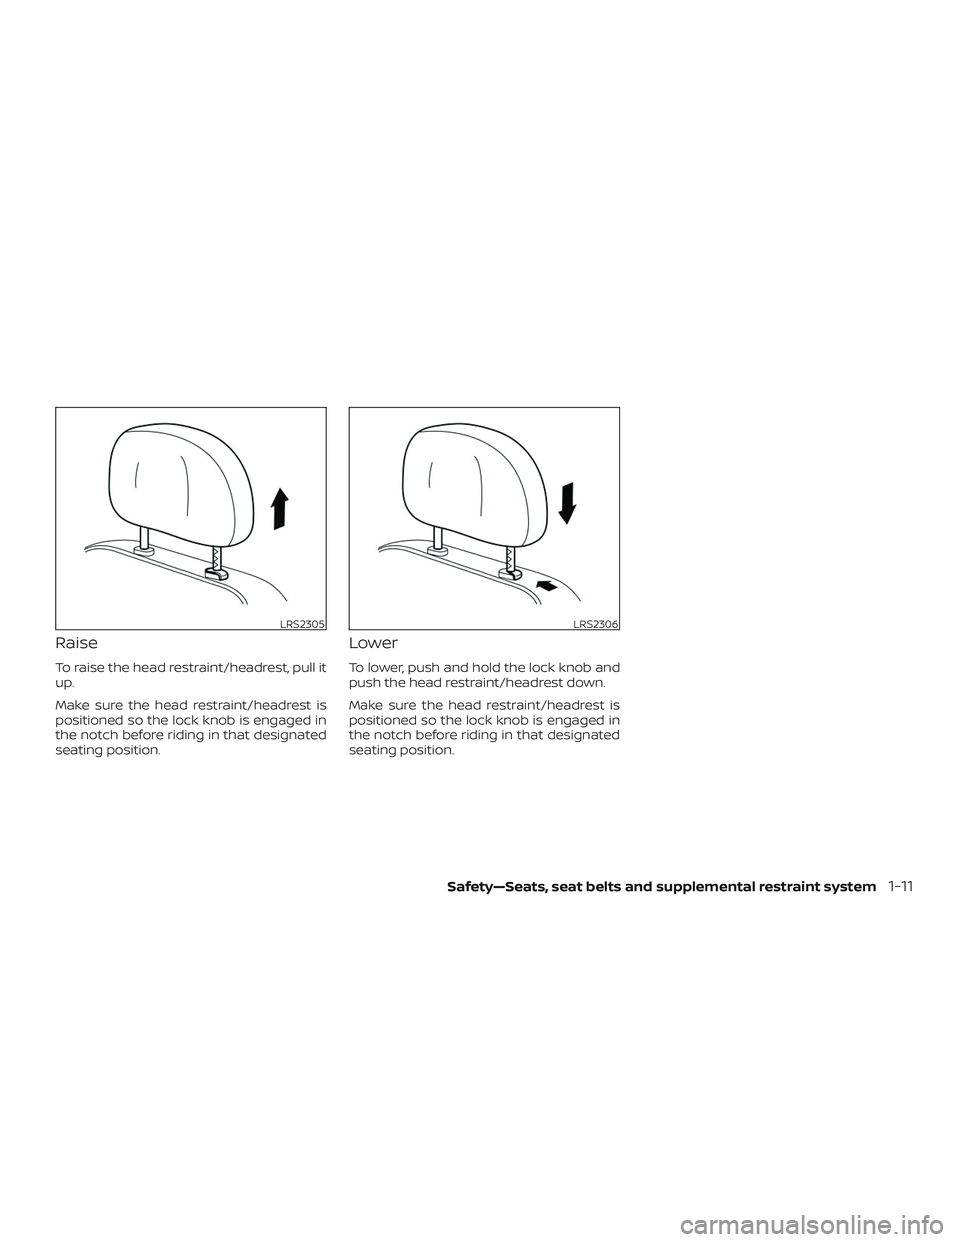 NISSAN ALTIMA 2019  Owner´s Manual Raise
To raise the head restraint/headrest, pull it
up.
Make sure the head restraint/headrest is
positioned so the lock knob is engaged in
the notch before riding in that designated
seating position.
